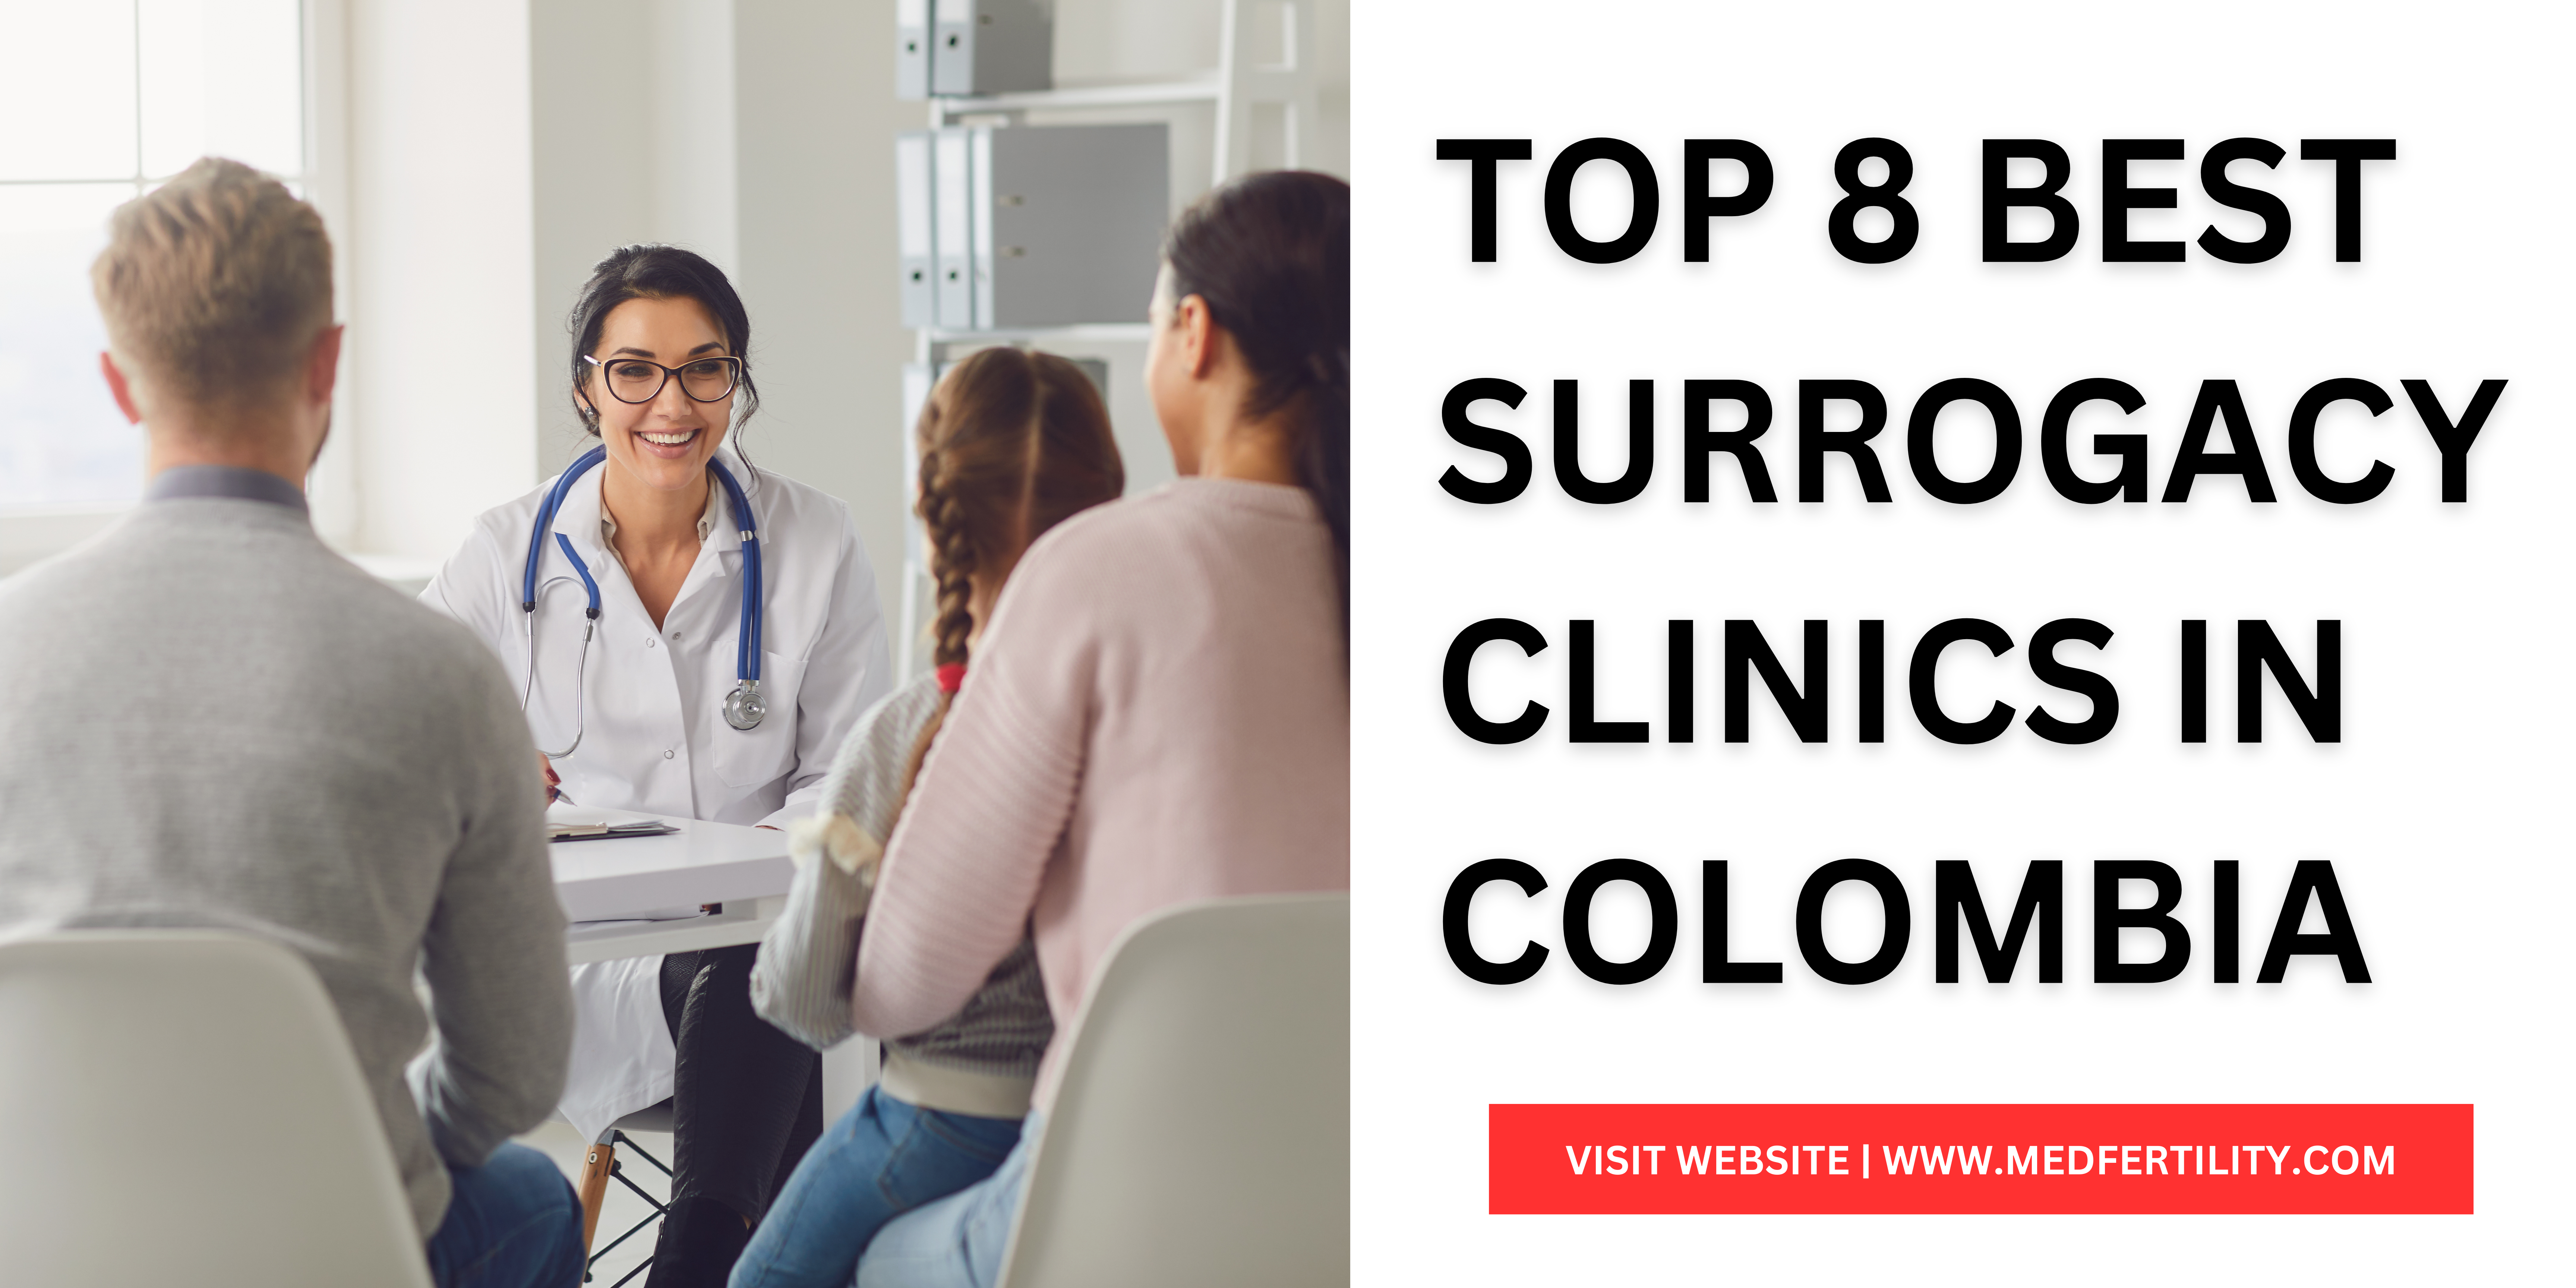 Top 8 Best Surrogacy Clinics in Colombia 2023